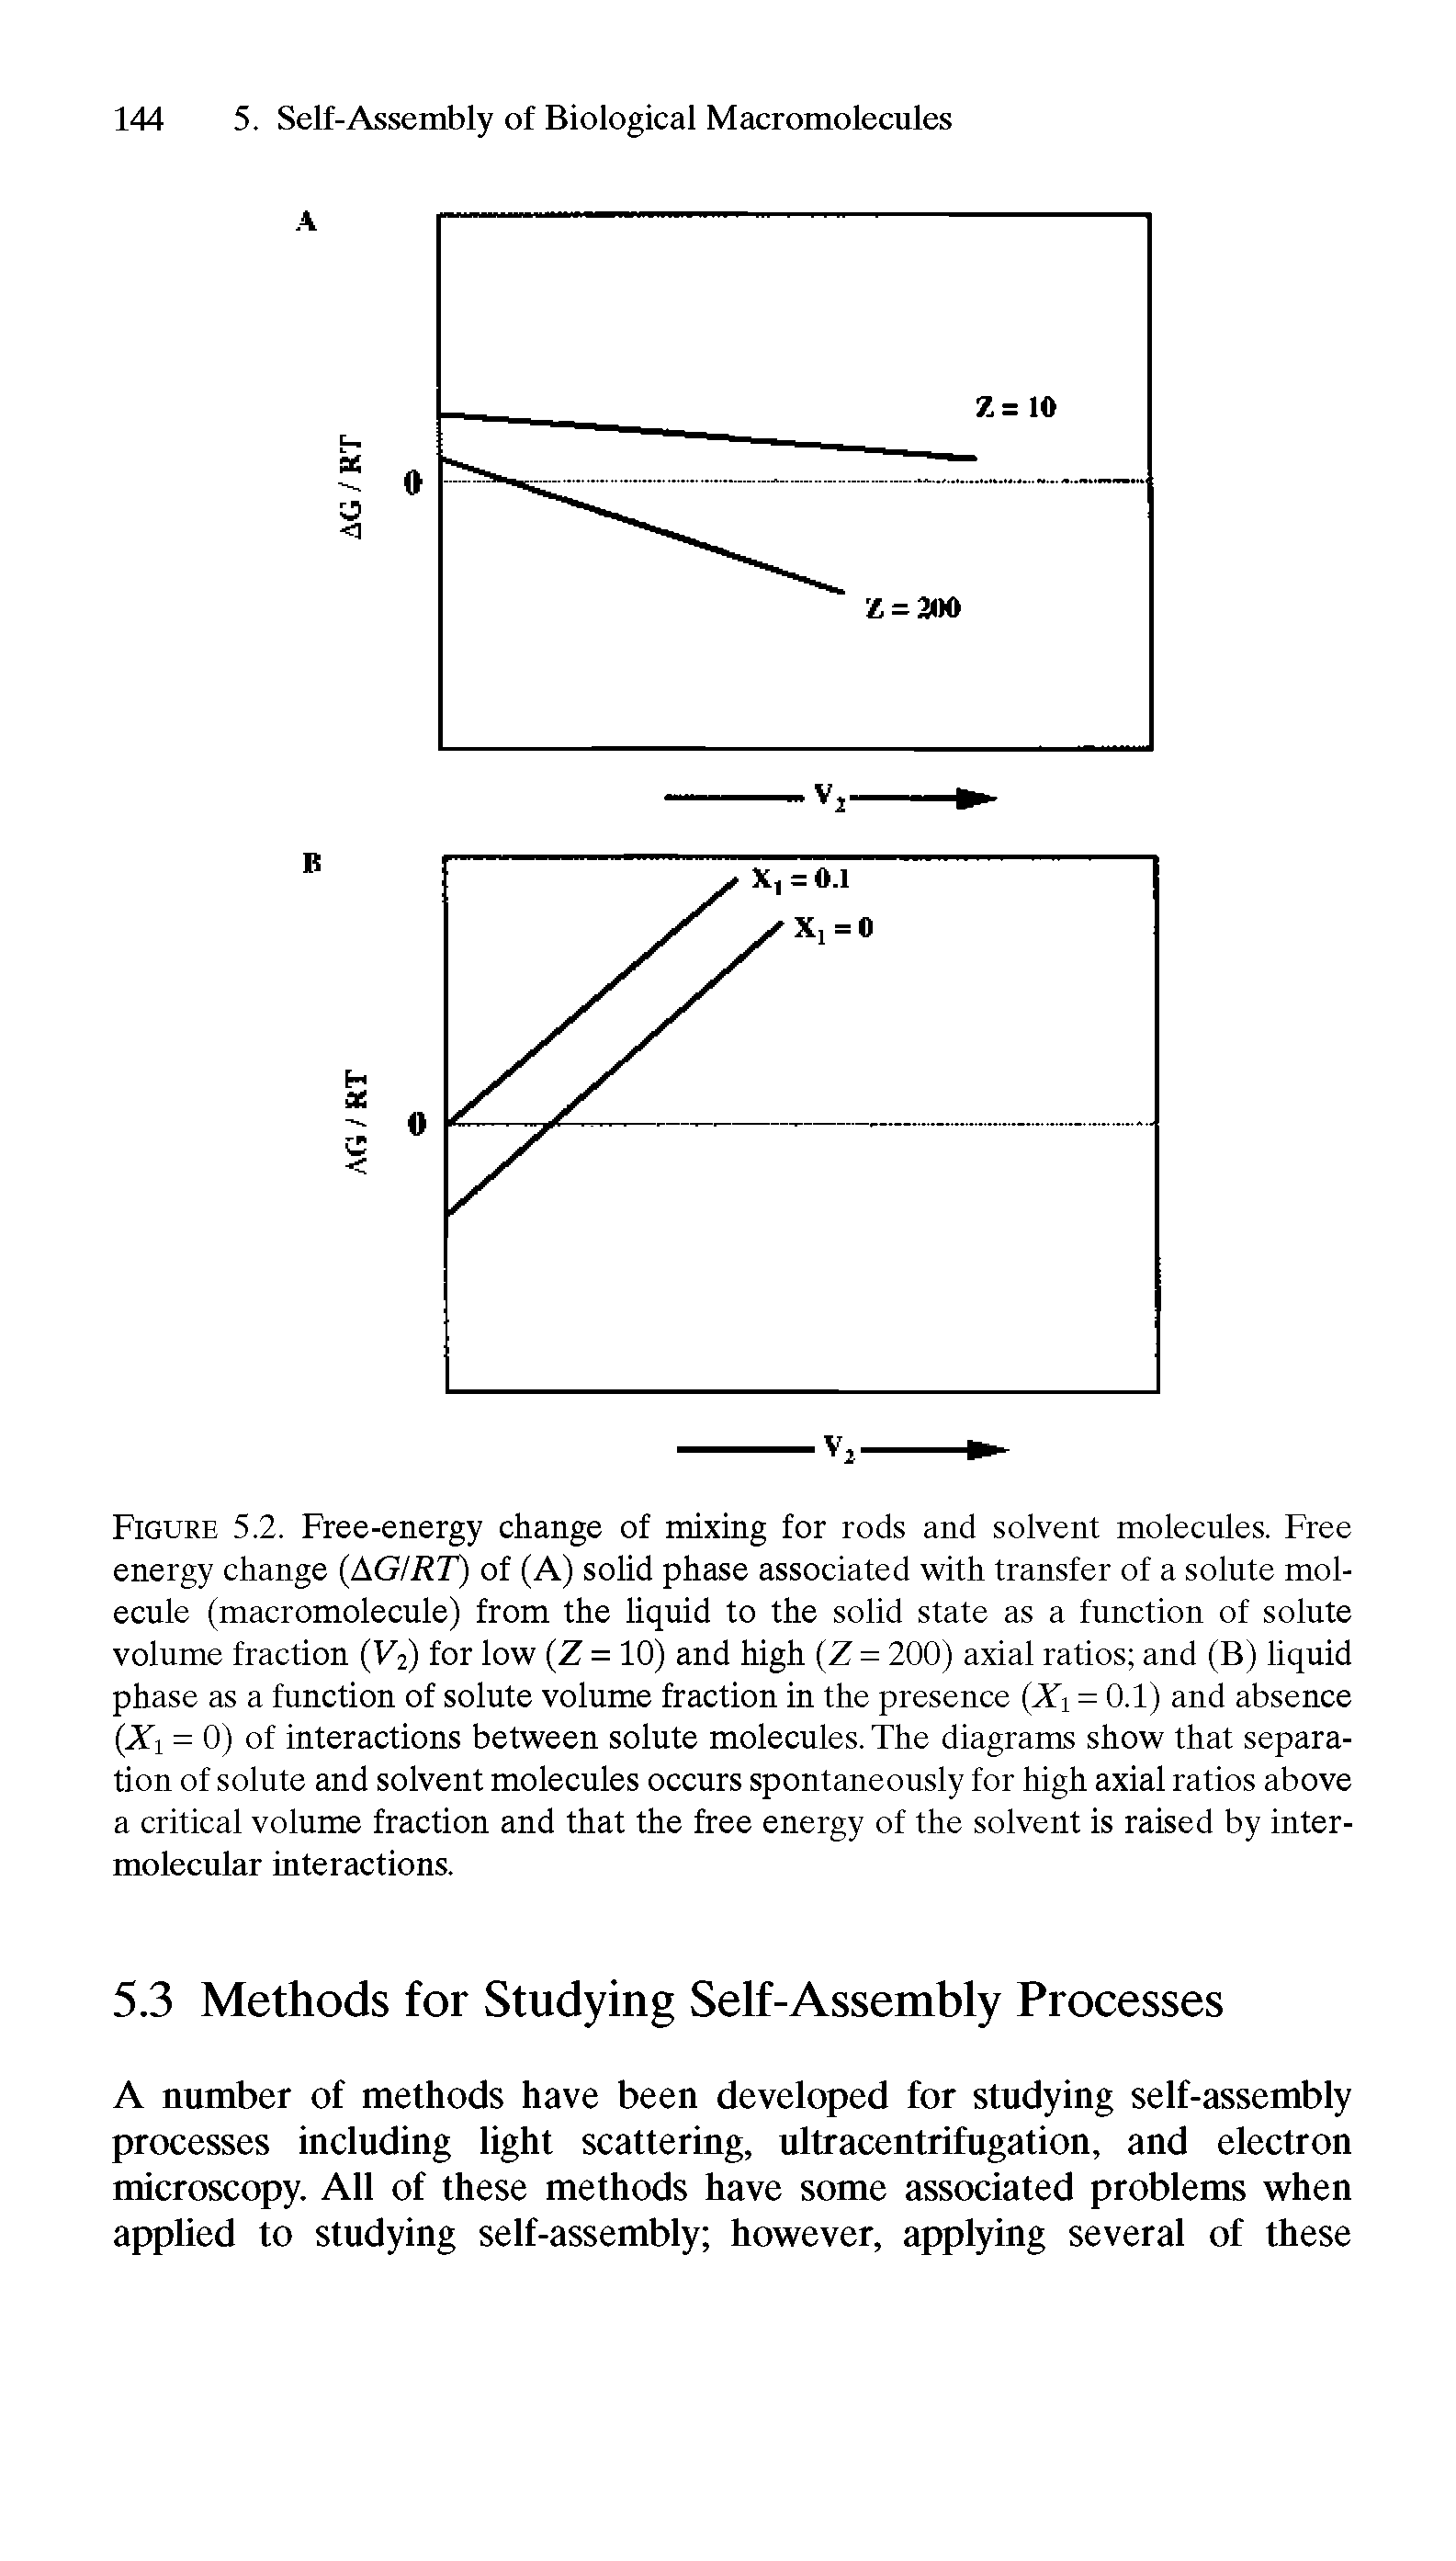 Figure 5.2. Free-energy change of mixing for rods and solvent molecules. Free energy change (AGIRT) of (A) solid phase associated with transfer of a solute molecule (macromolecule) from the liquid to the solid state as a function of solute volume fraction (V2) for low (Z = 10) and high (Z = 200) axial ratios and (B) liquid phase as a function of solute volume fraction in the presence (Xi = 0.1) and absence (Xi = 0) of interactions between solute molecules. The diagrams show that separation of solute and solvent molecules occurs spontaneously for high axial ratios above a critical volume fraction and that the free energy of the solvent is raised by inter-molecular interactions.